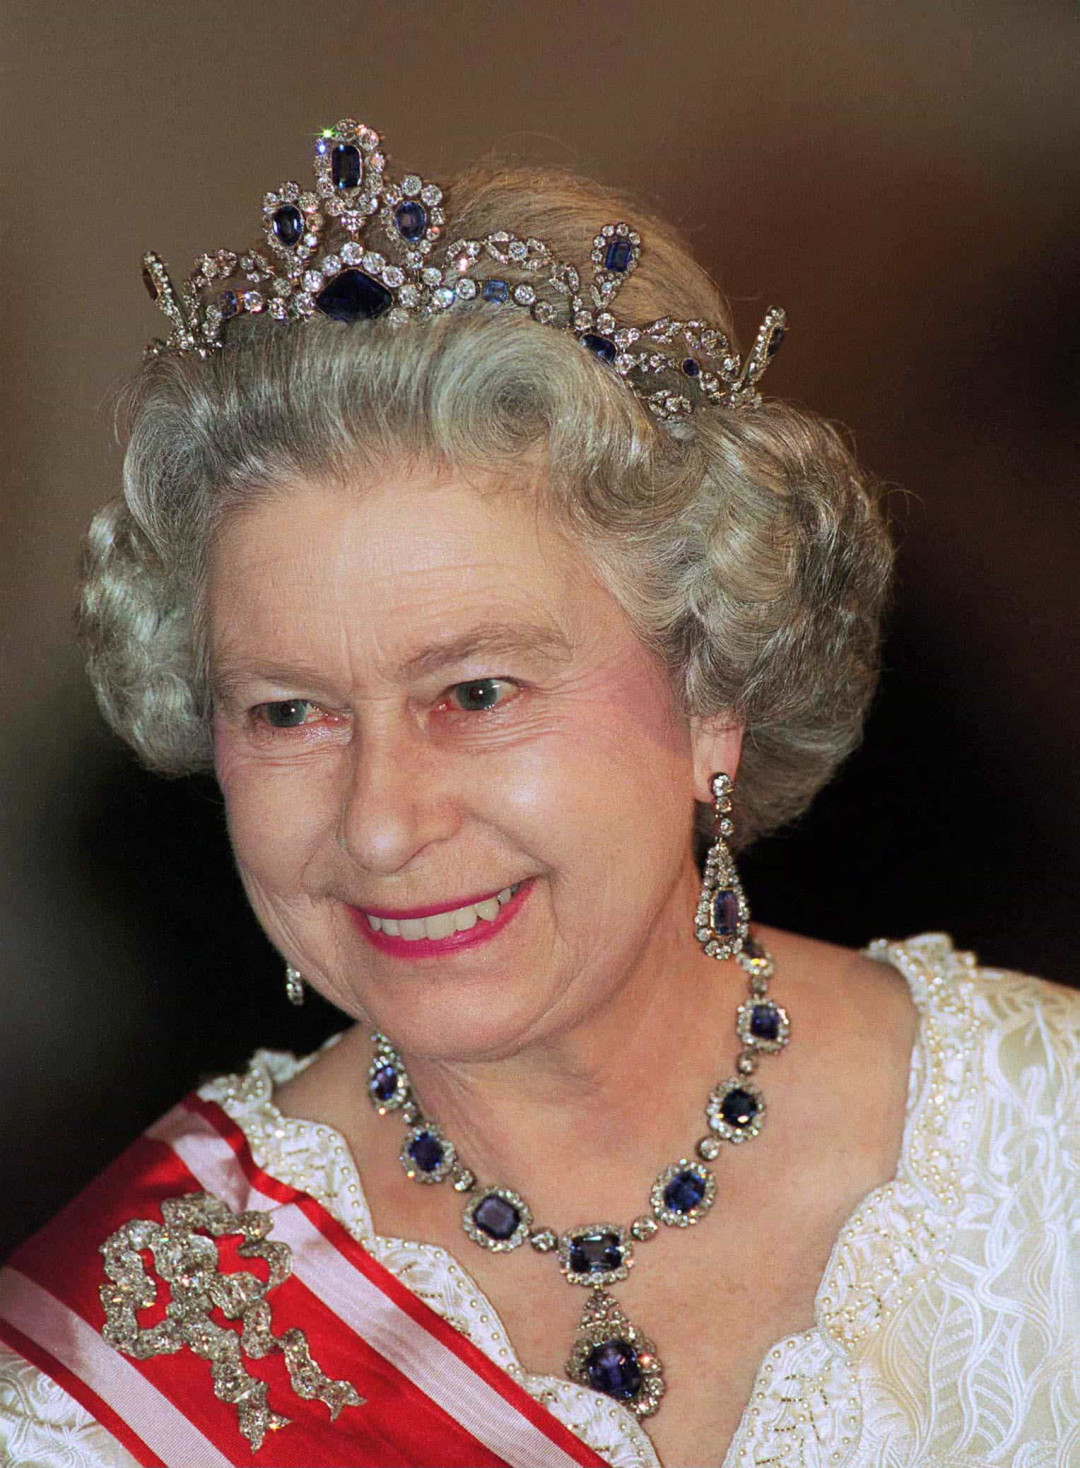 Towering tiaras and more: Extravagant jewelry owned by British royals